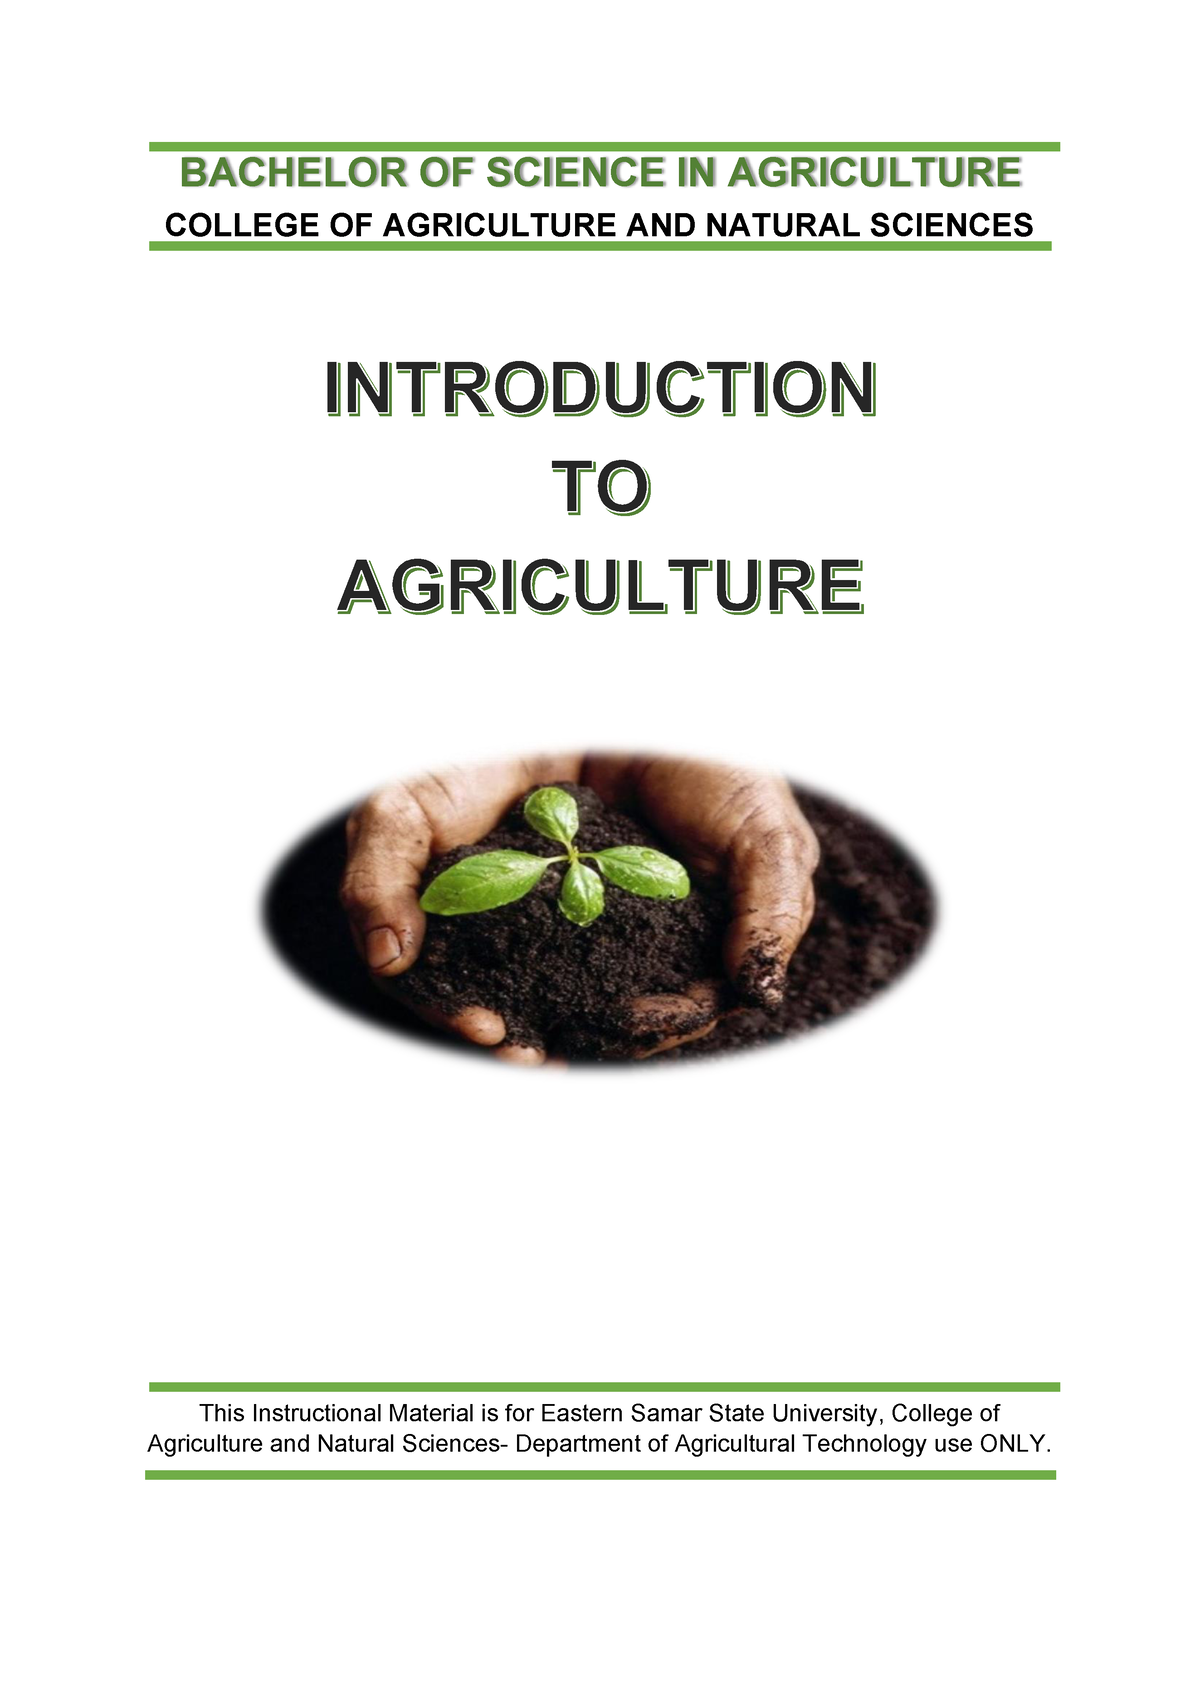 title research about agriculture pdf